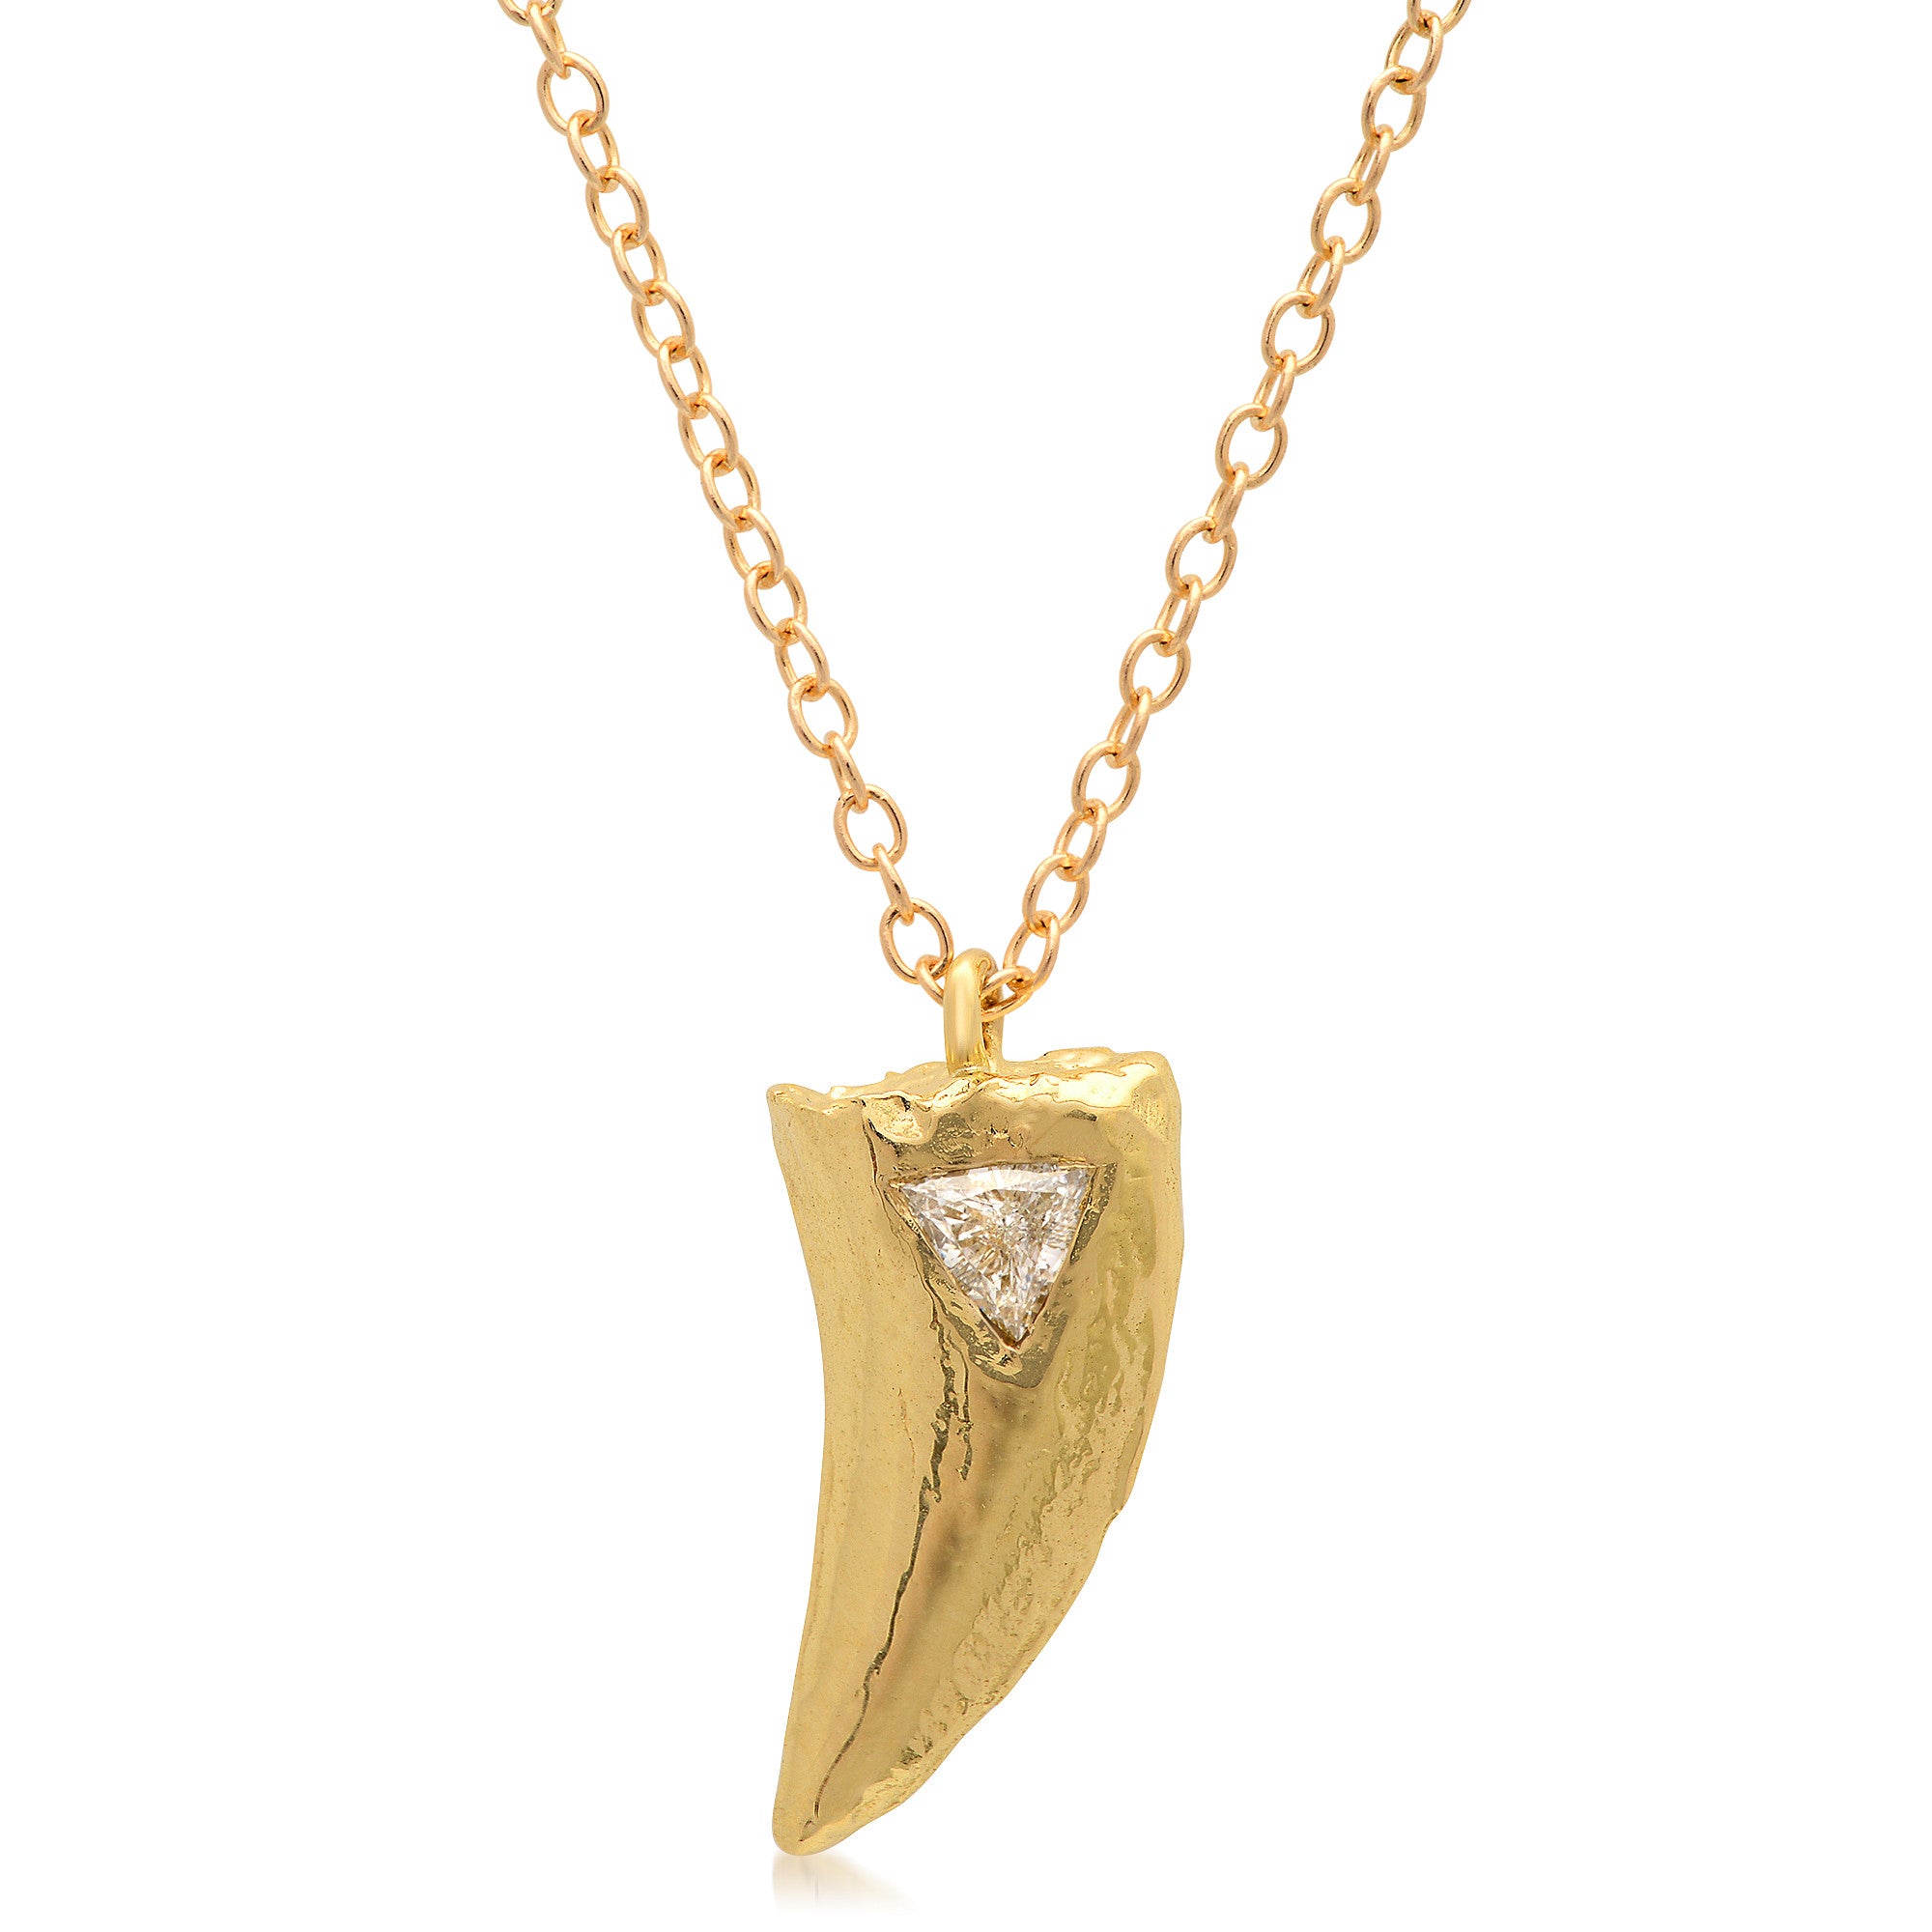 T-Rex Dinosaur Bone Silver Necklace // Cretaceous Period // 68-66 Million  Years Old - Muzeion - Touch of Modern